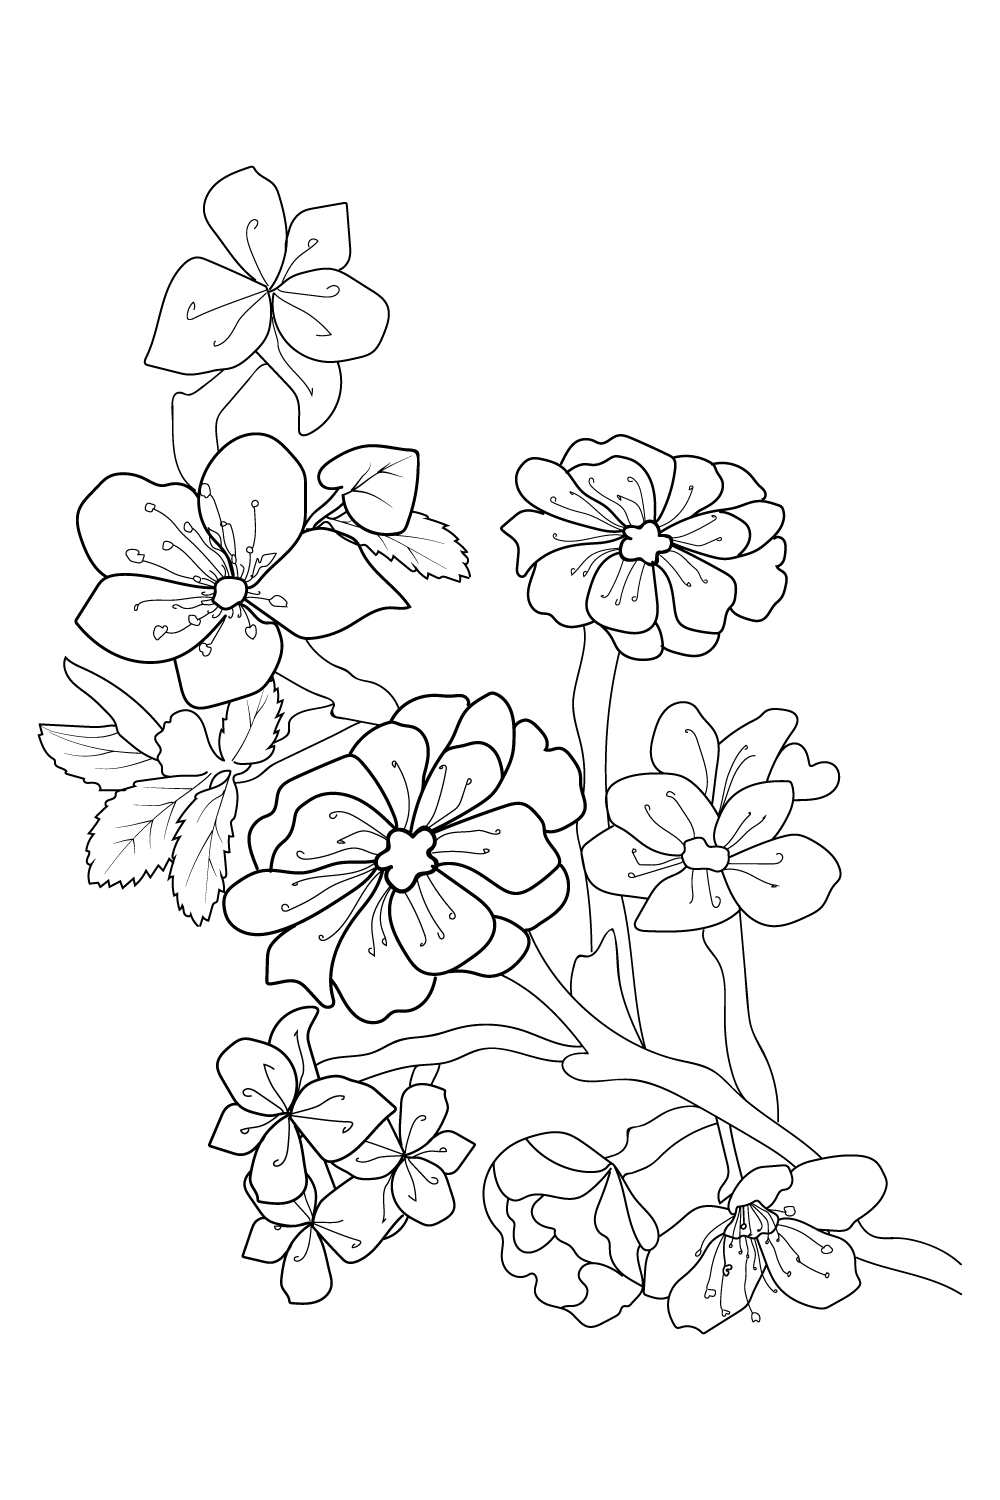 Cherry, cherry flowers, blossom cherry, cherry blossom, Weeping Cherry cherry flower line art coloring pages, hand drawn vector illustration, pencil drawing image clip art pinterest preview image.